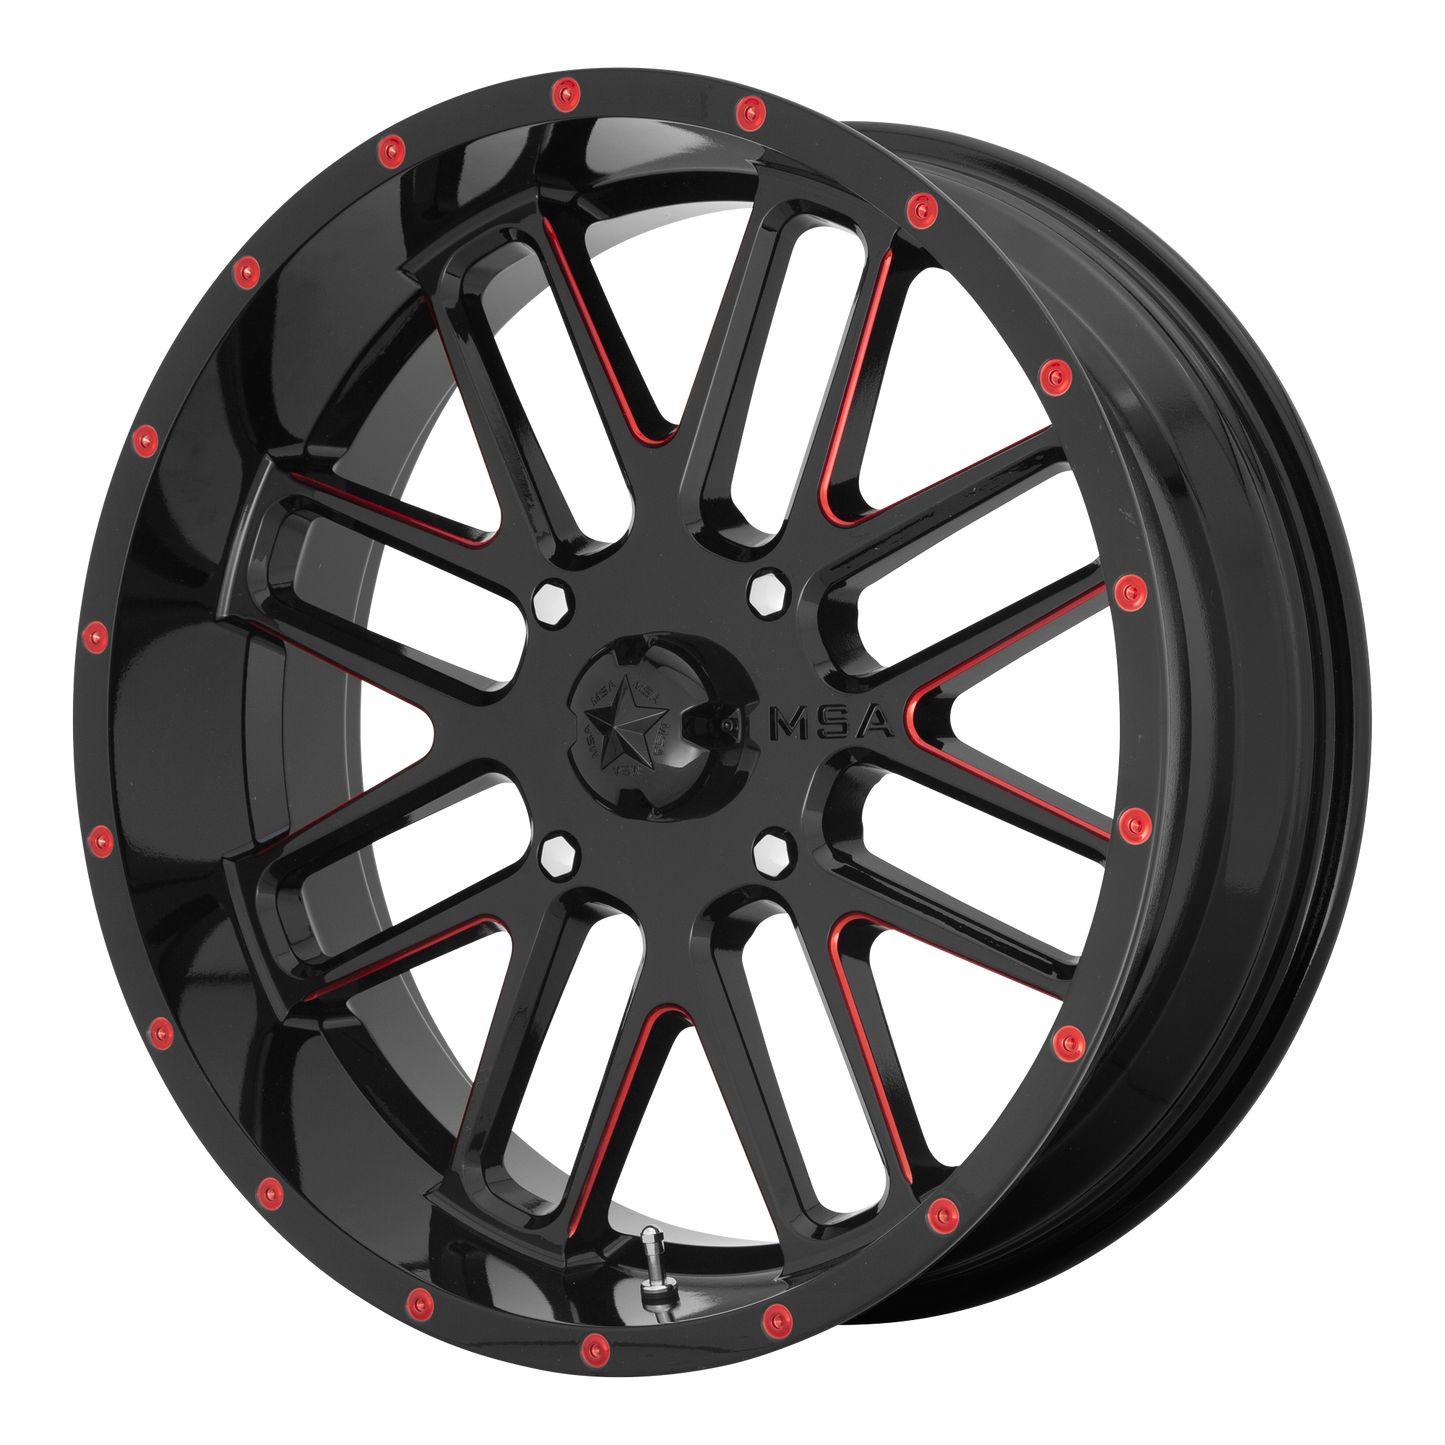 MSA Offroad M35 Bandit Wheel 4x156 Gloss Black Milled with Red Tint